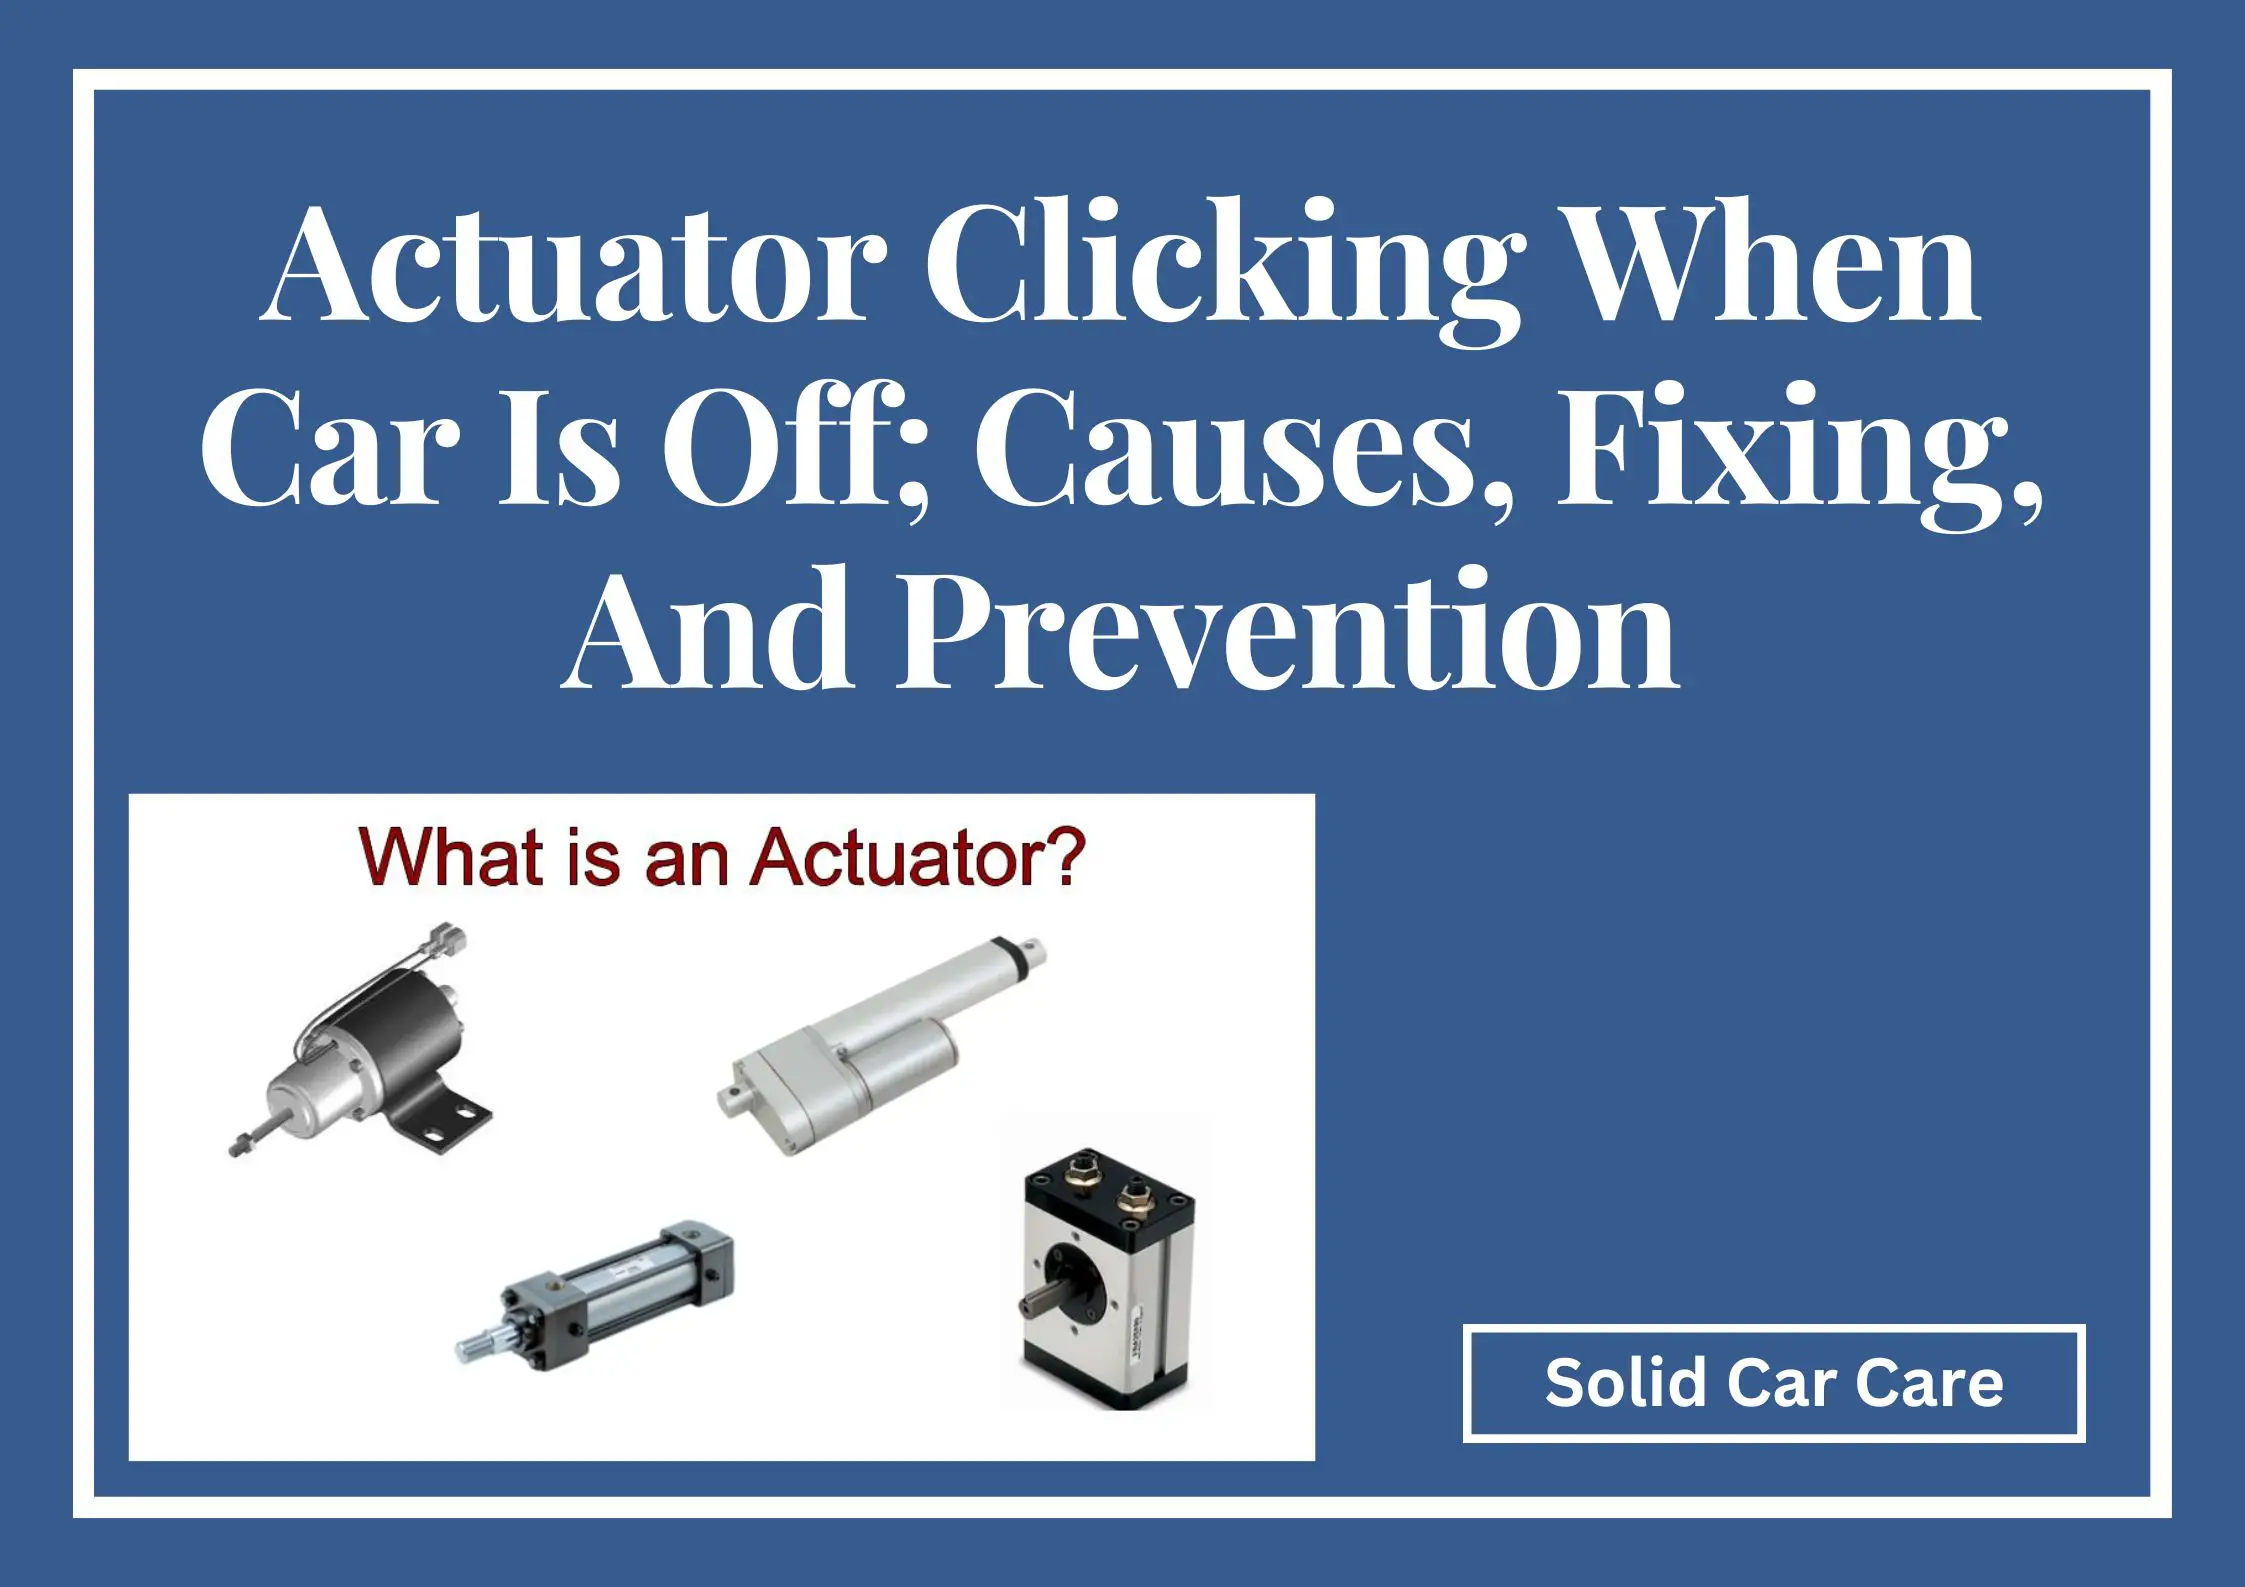 Actuator Clicking When Car Is Off